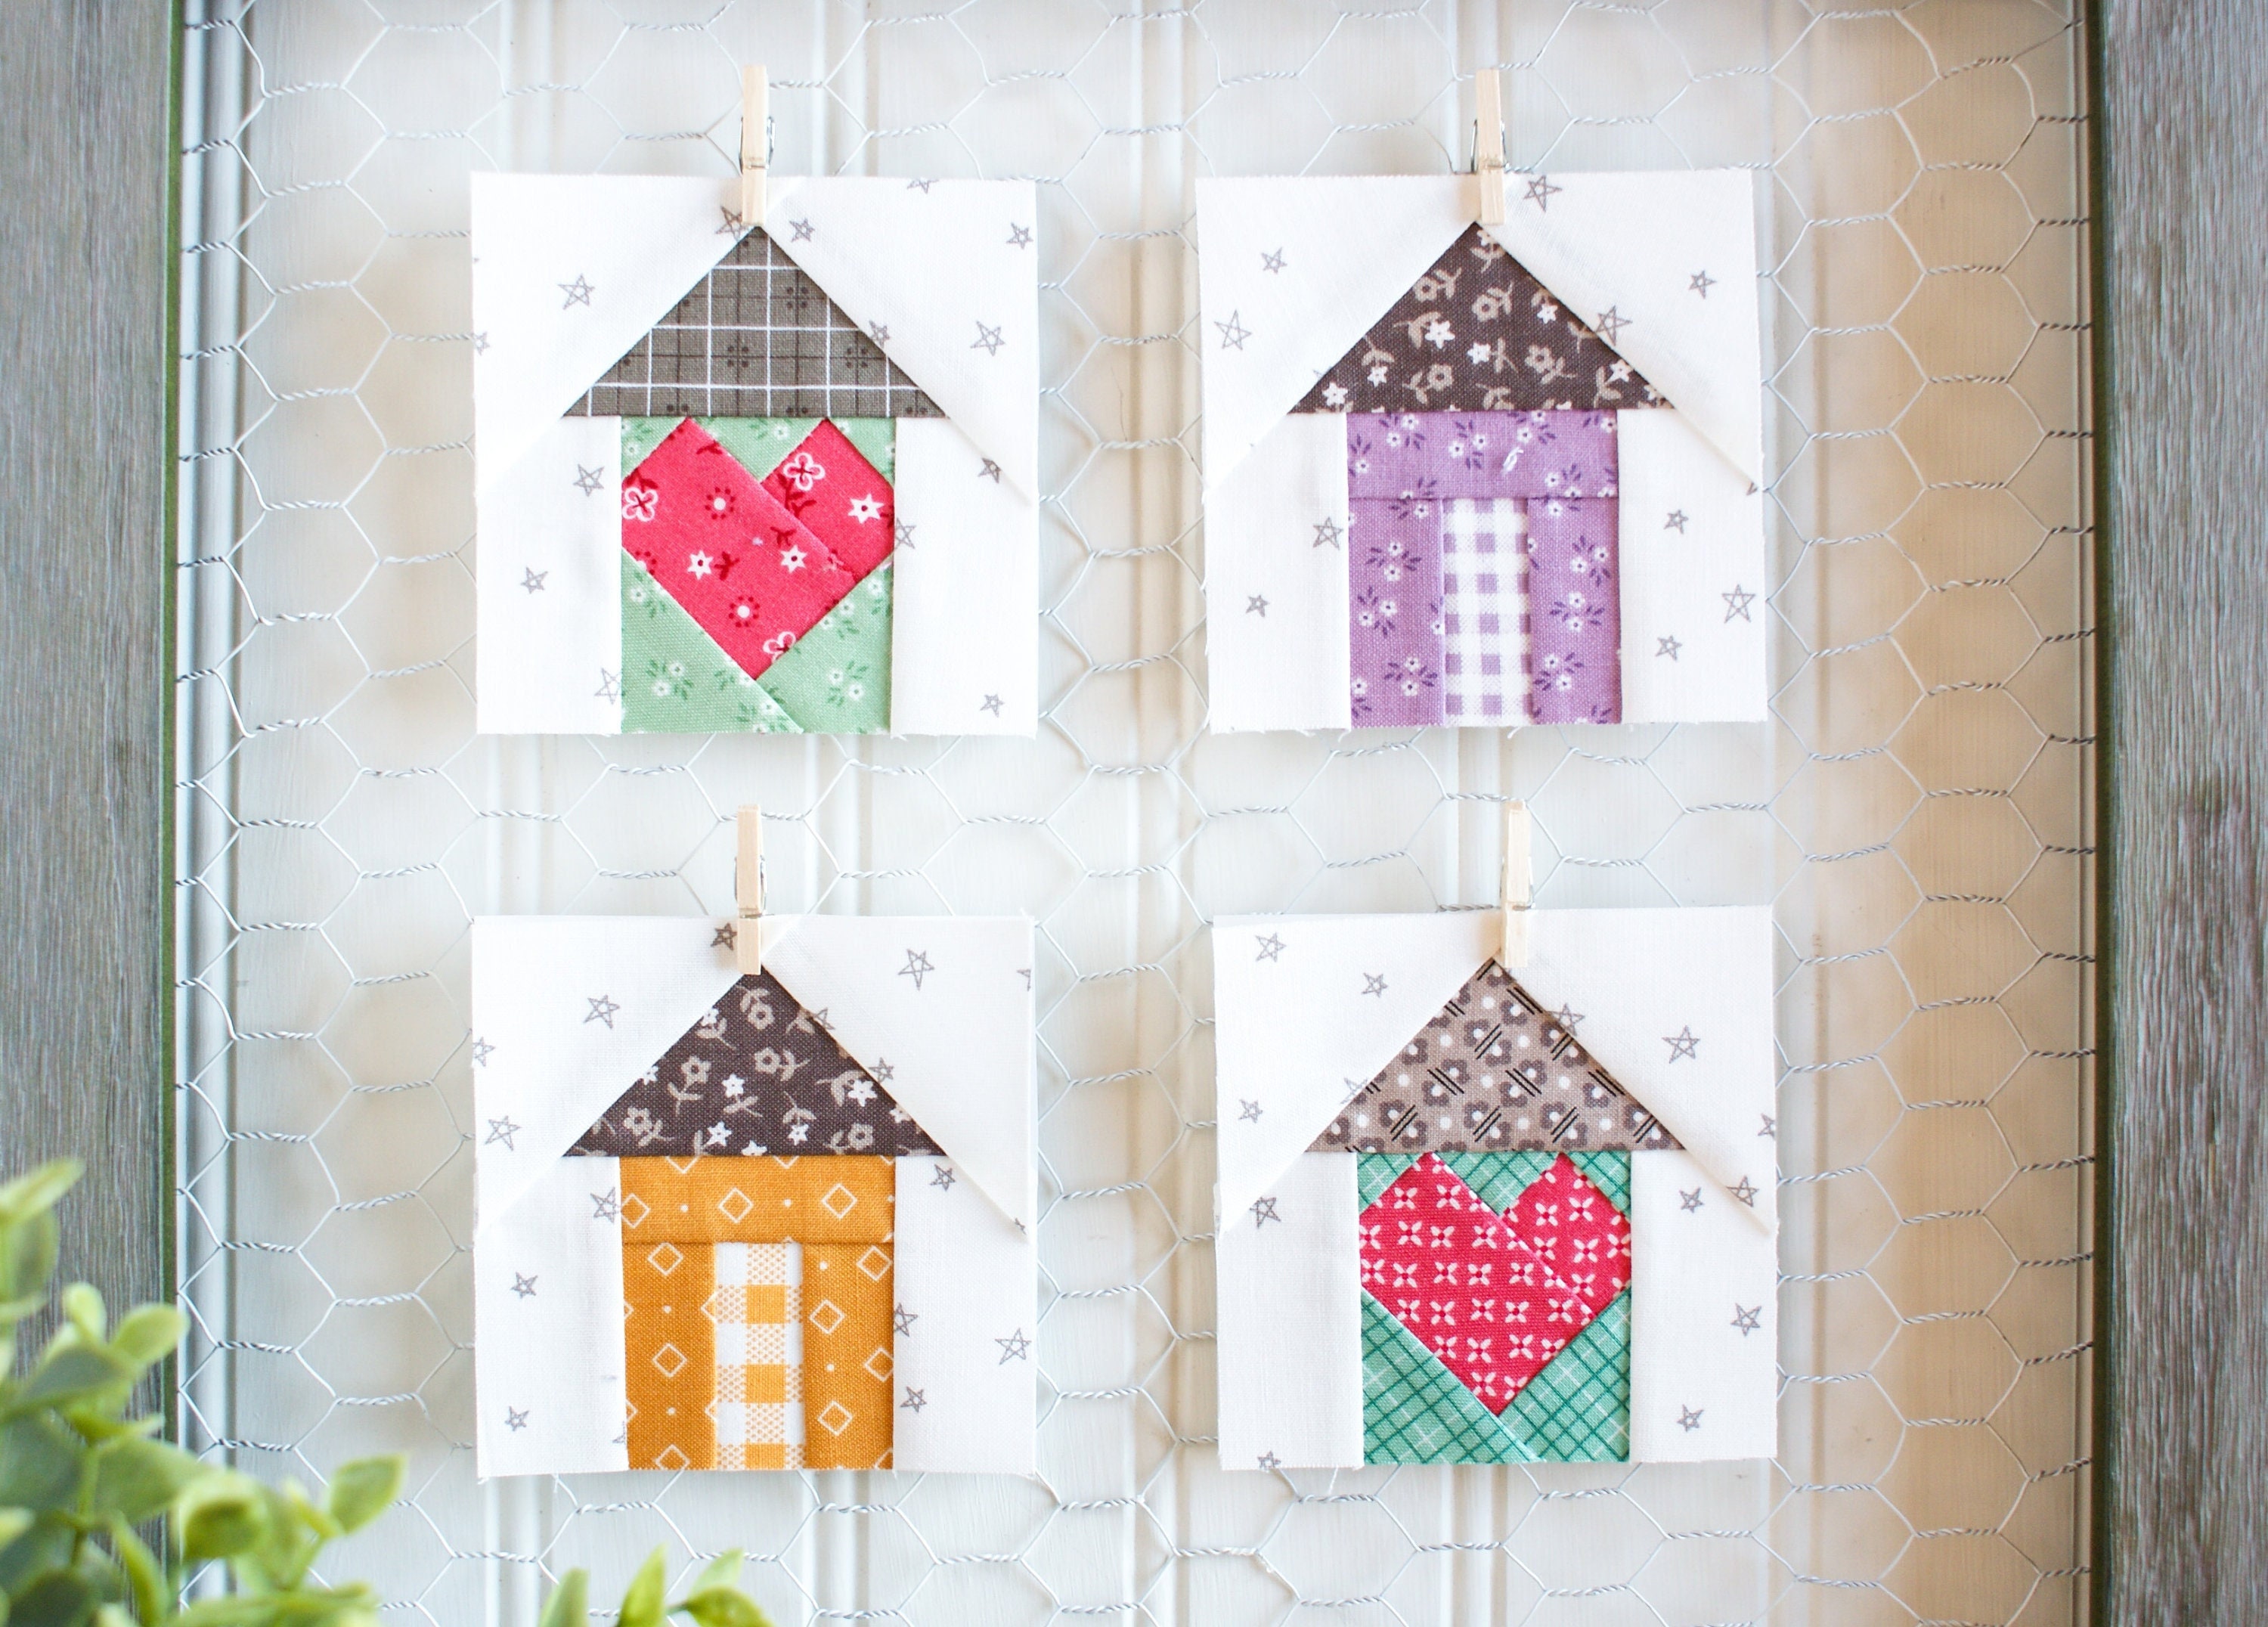 English Paper Piecing (EPP) mini quilt – Sewn Up